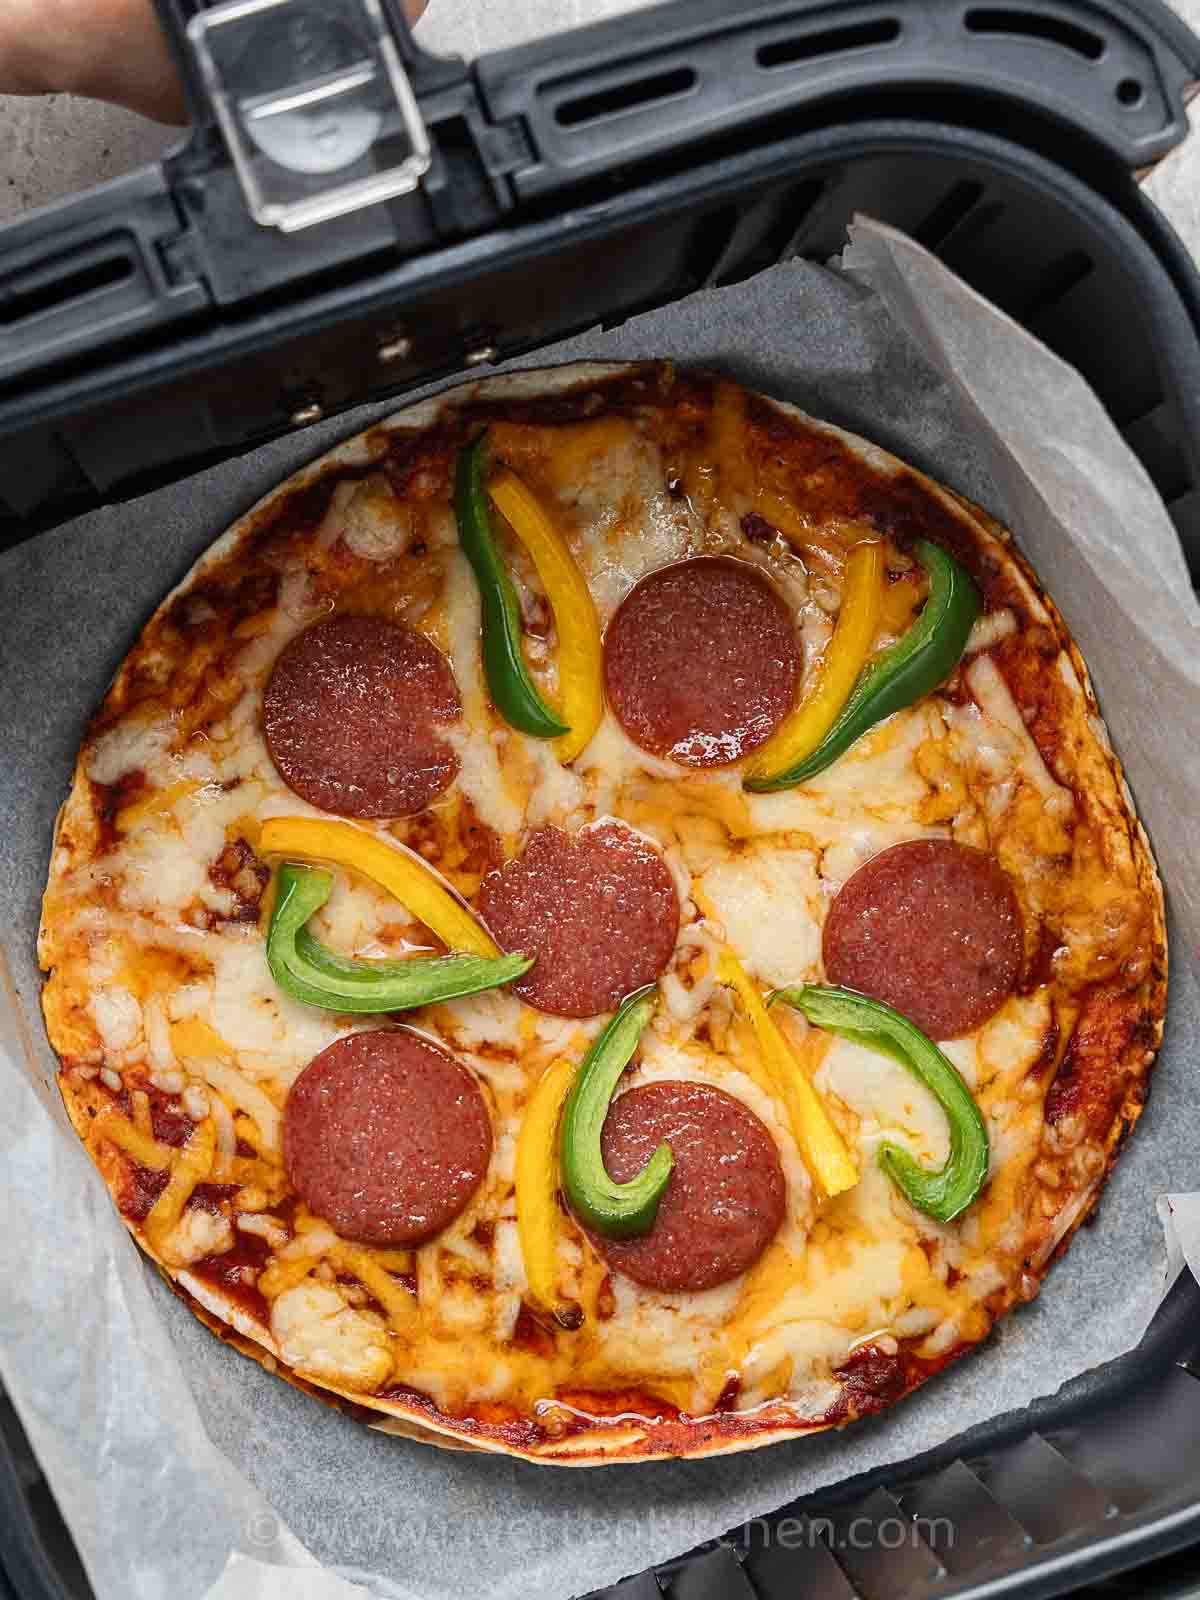 pizza made of tortilla wraps, bell pepper, cheese, and salami.